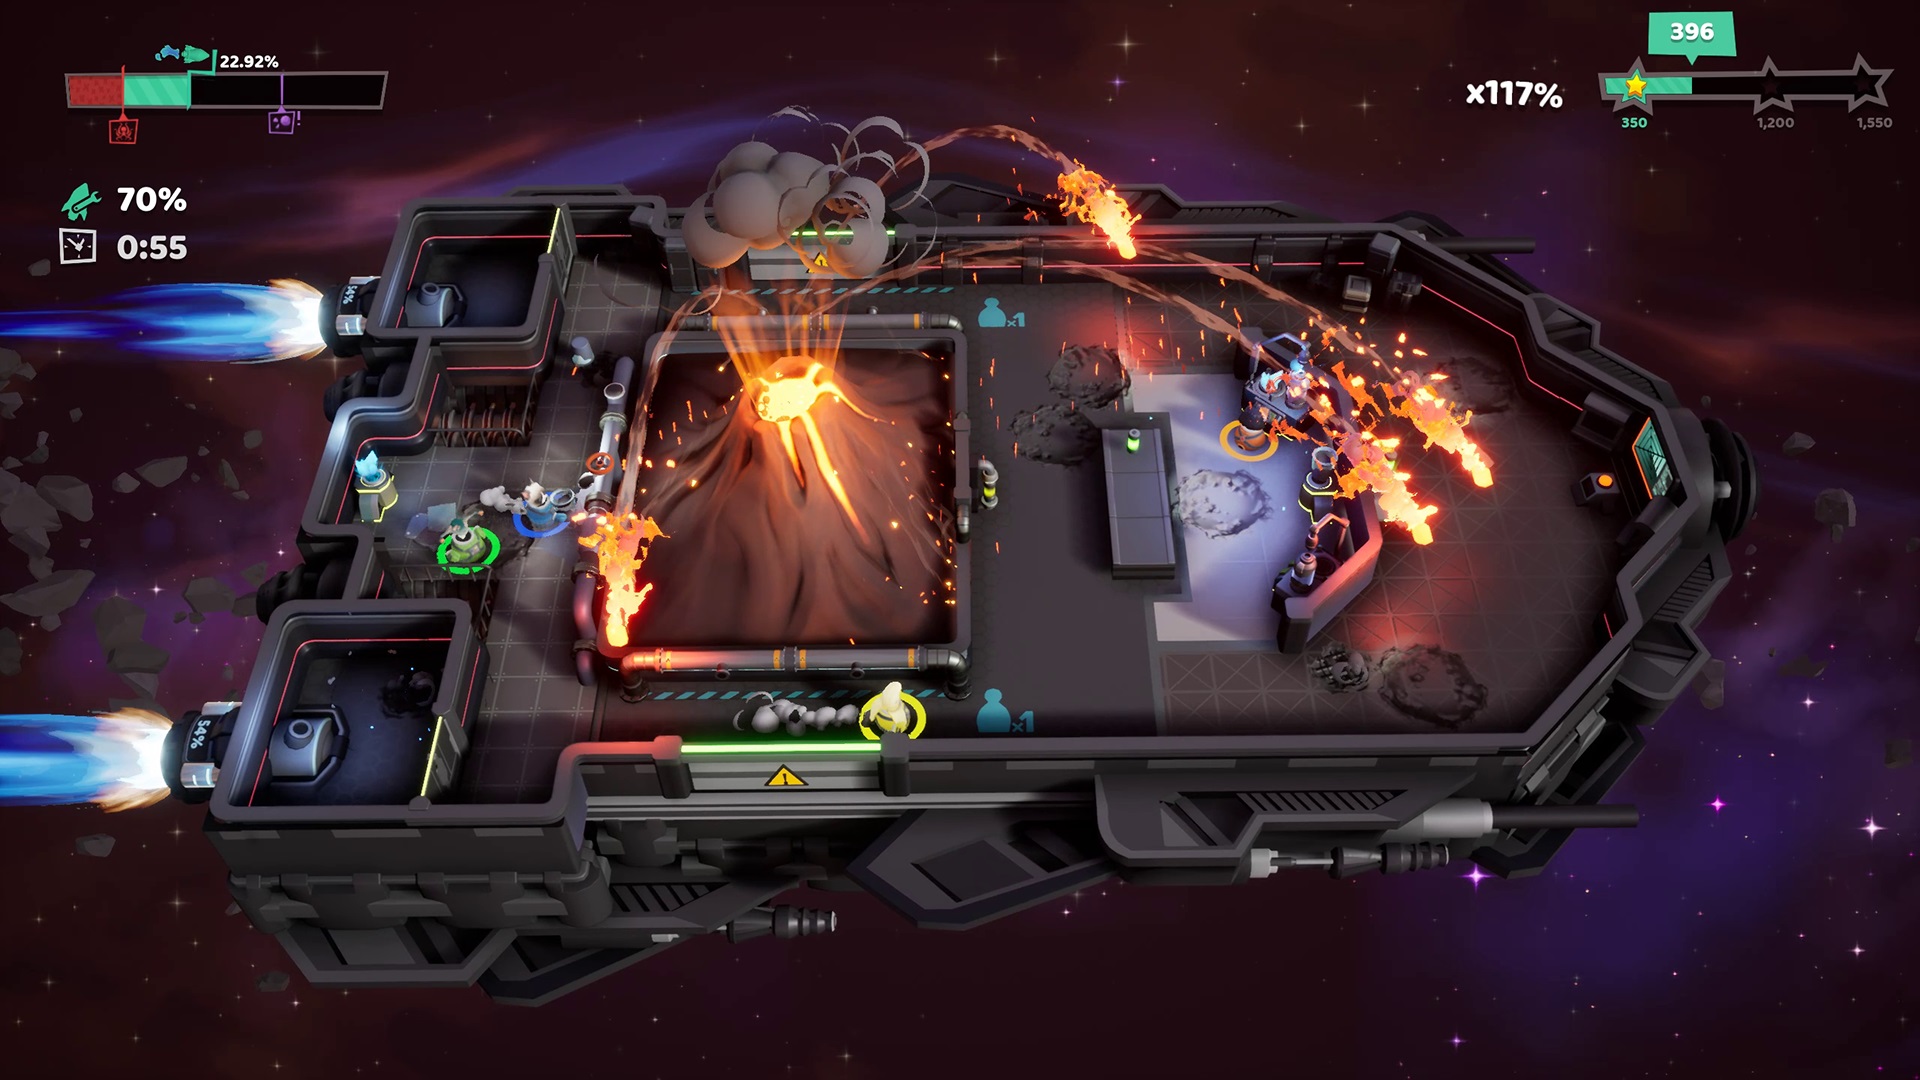 4-Players PC Couch Co-op Shoot'em Up - 1.0 - Release Announcements